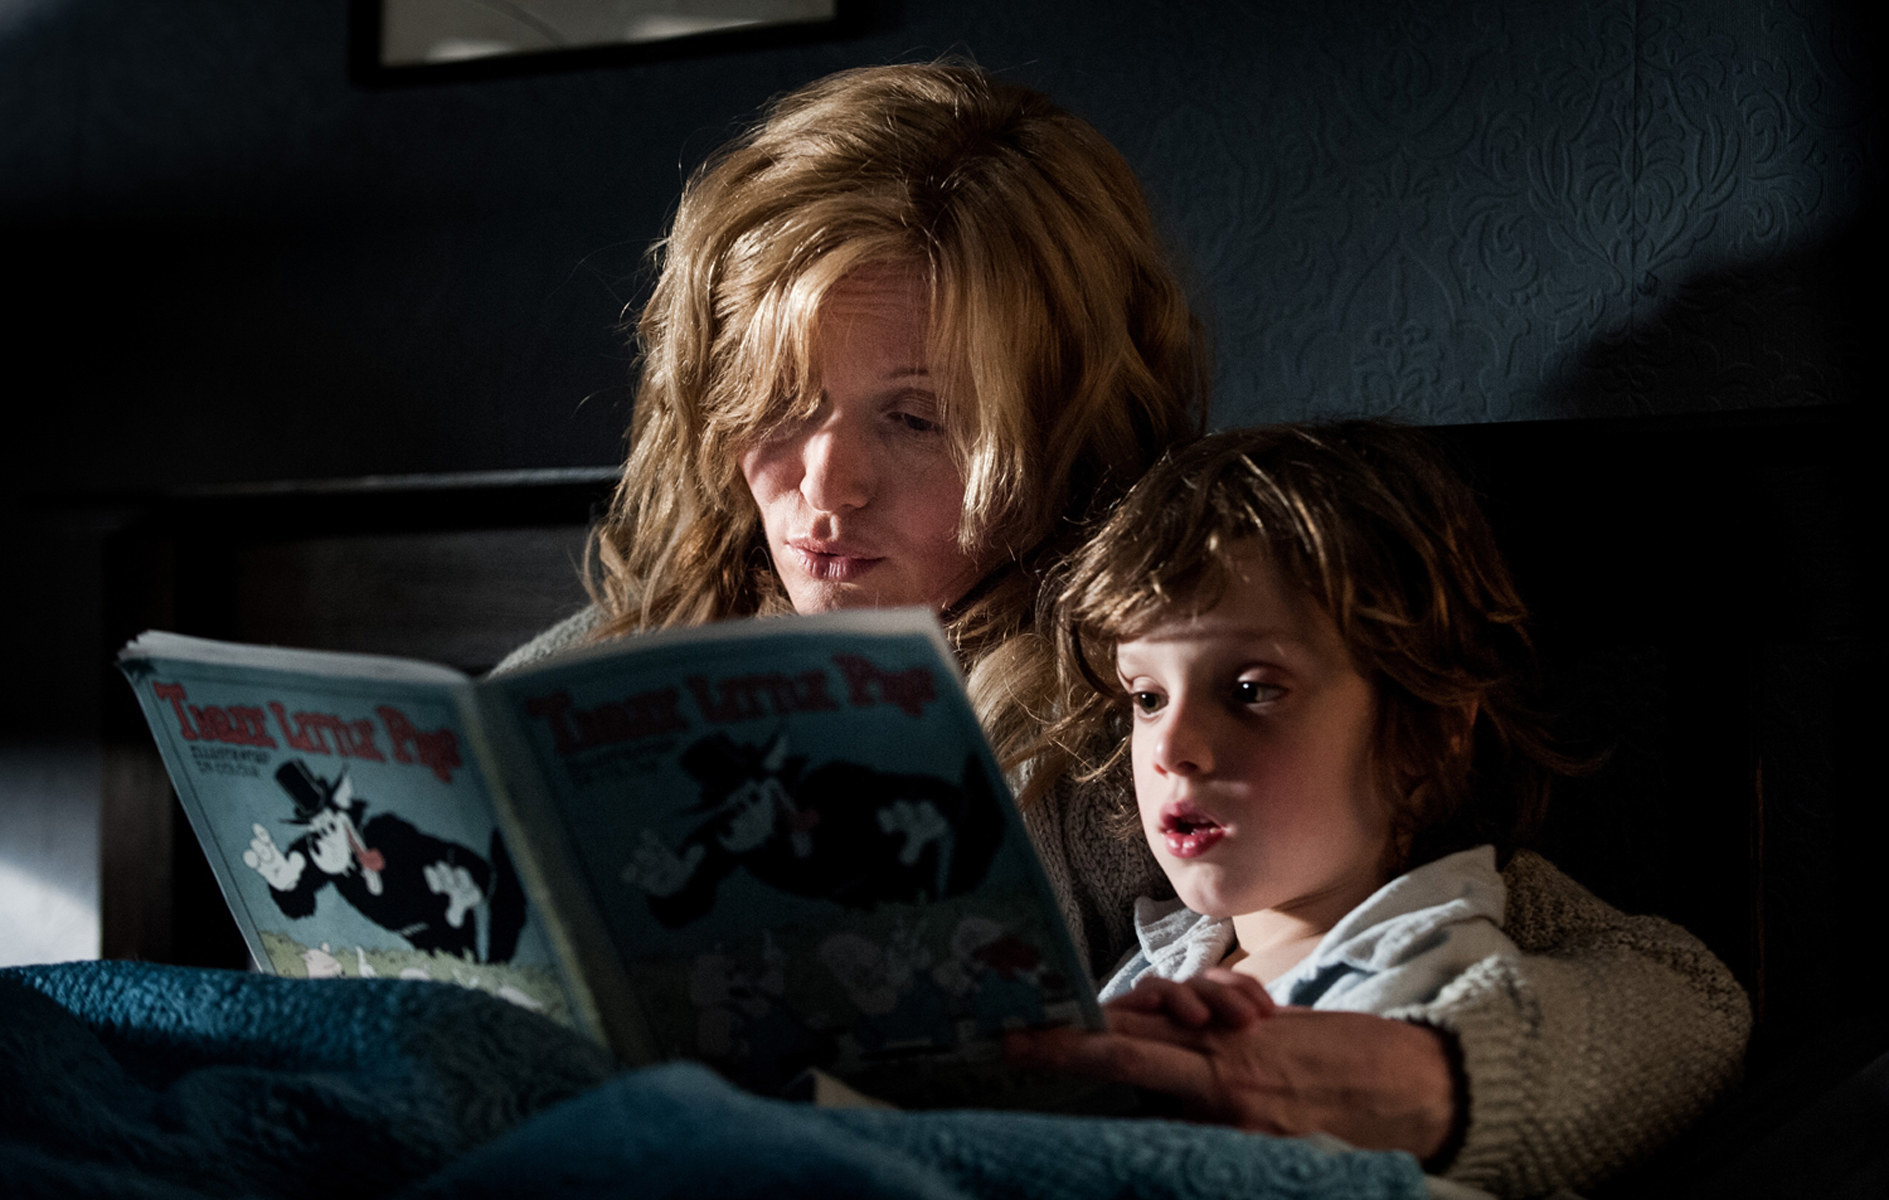 the mother reading a story to her son in bed